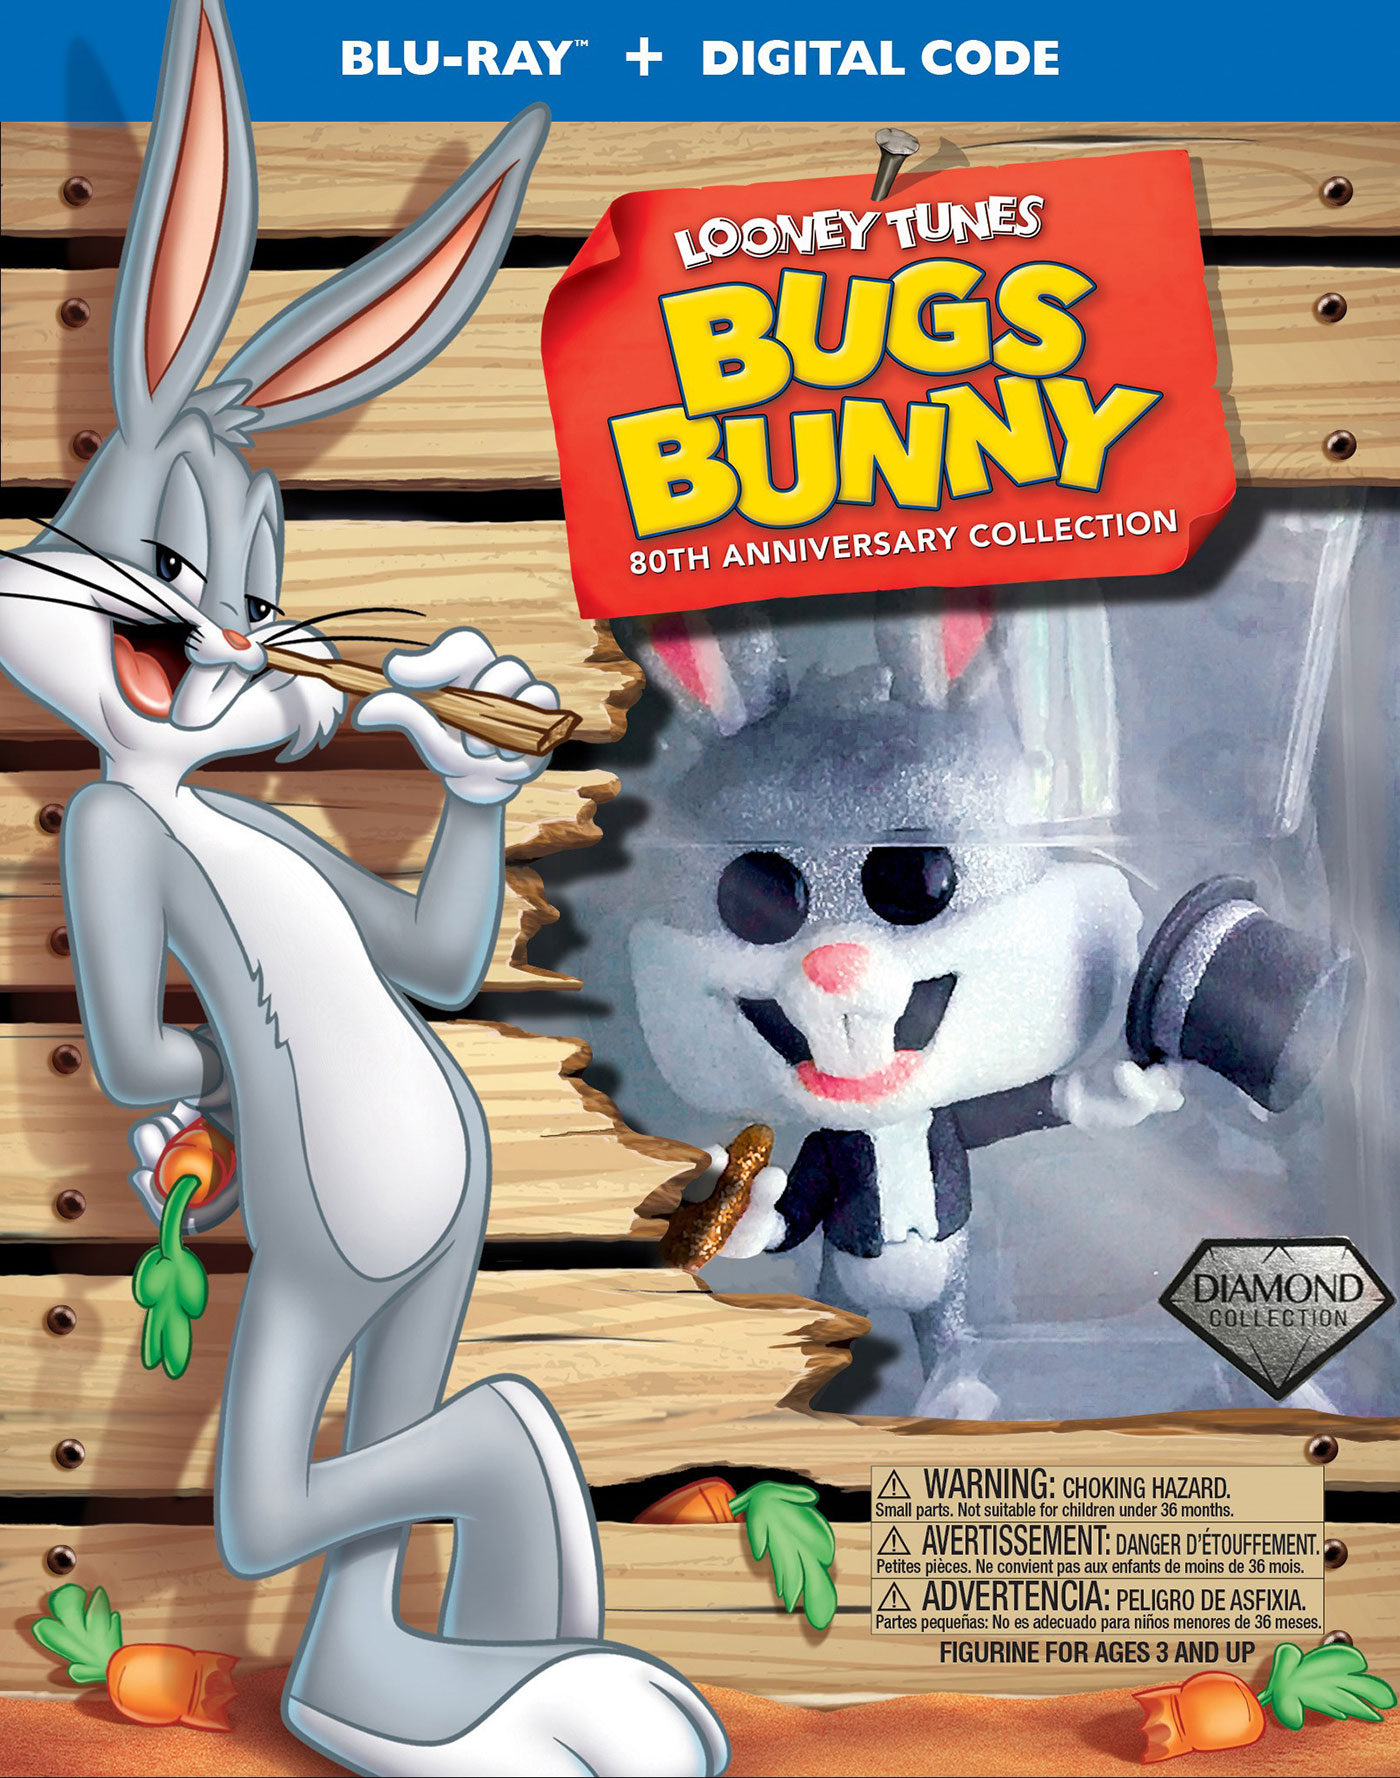 Bugs Bunny Deserved A Great Blu-Ray To Celebrate His 80th Birthday – But  This Ain't It